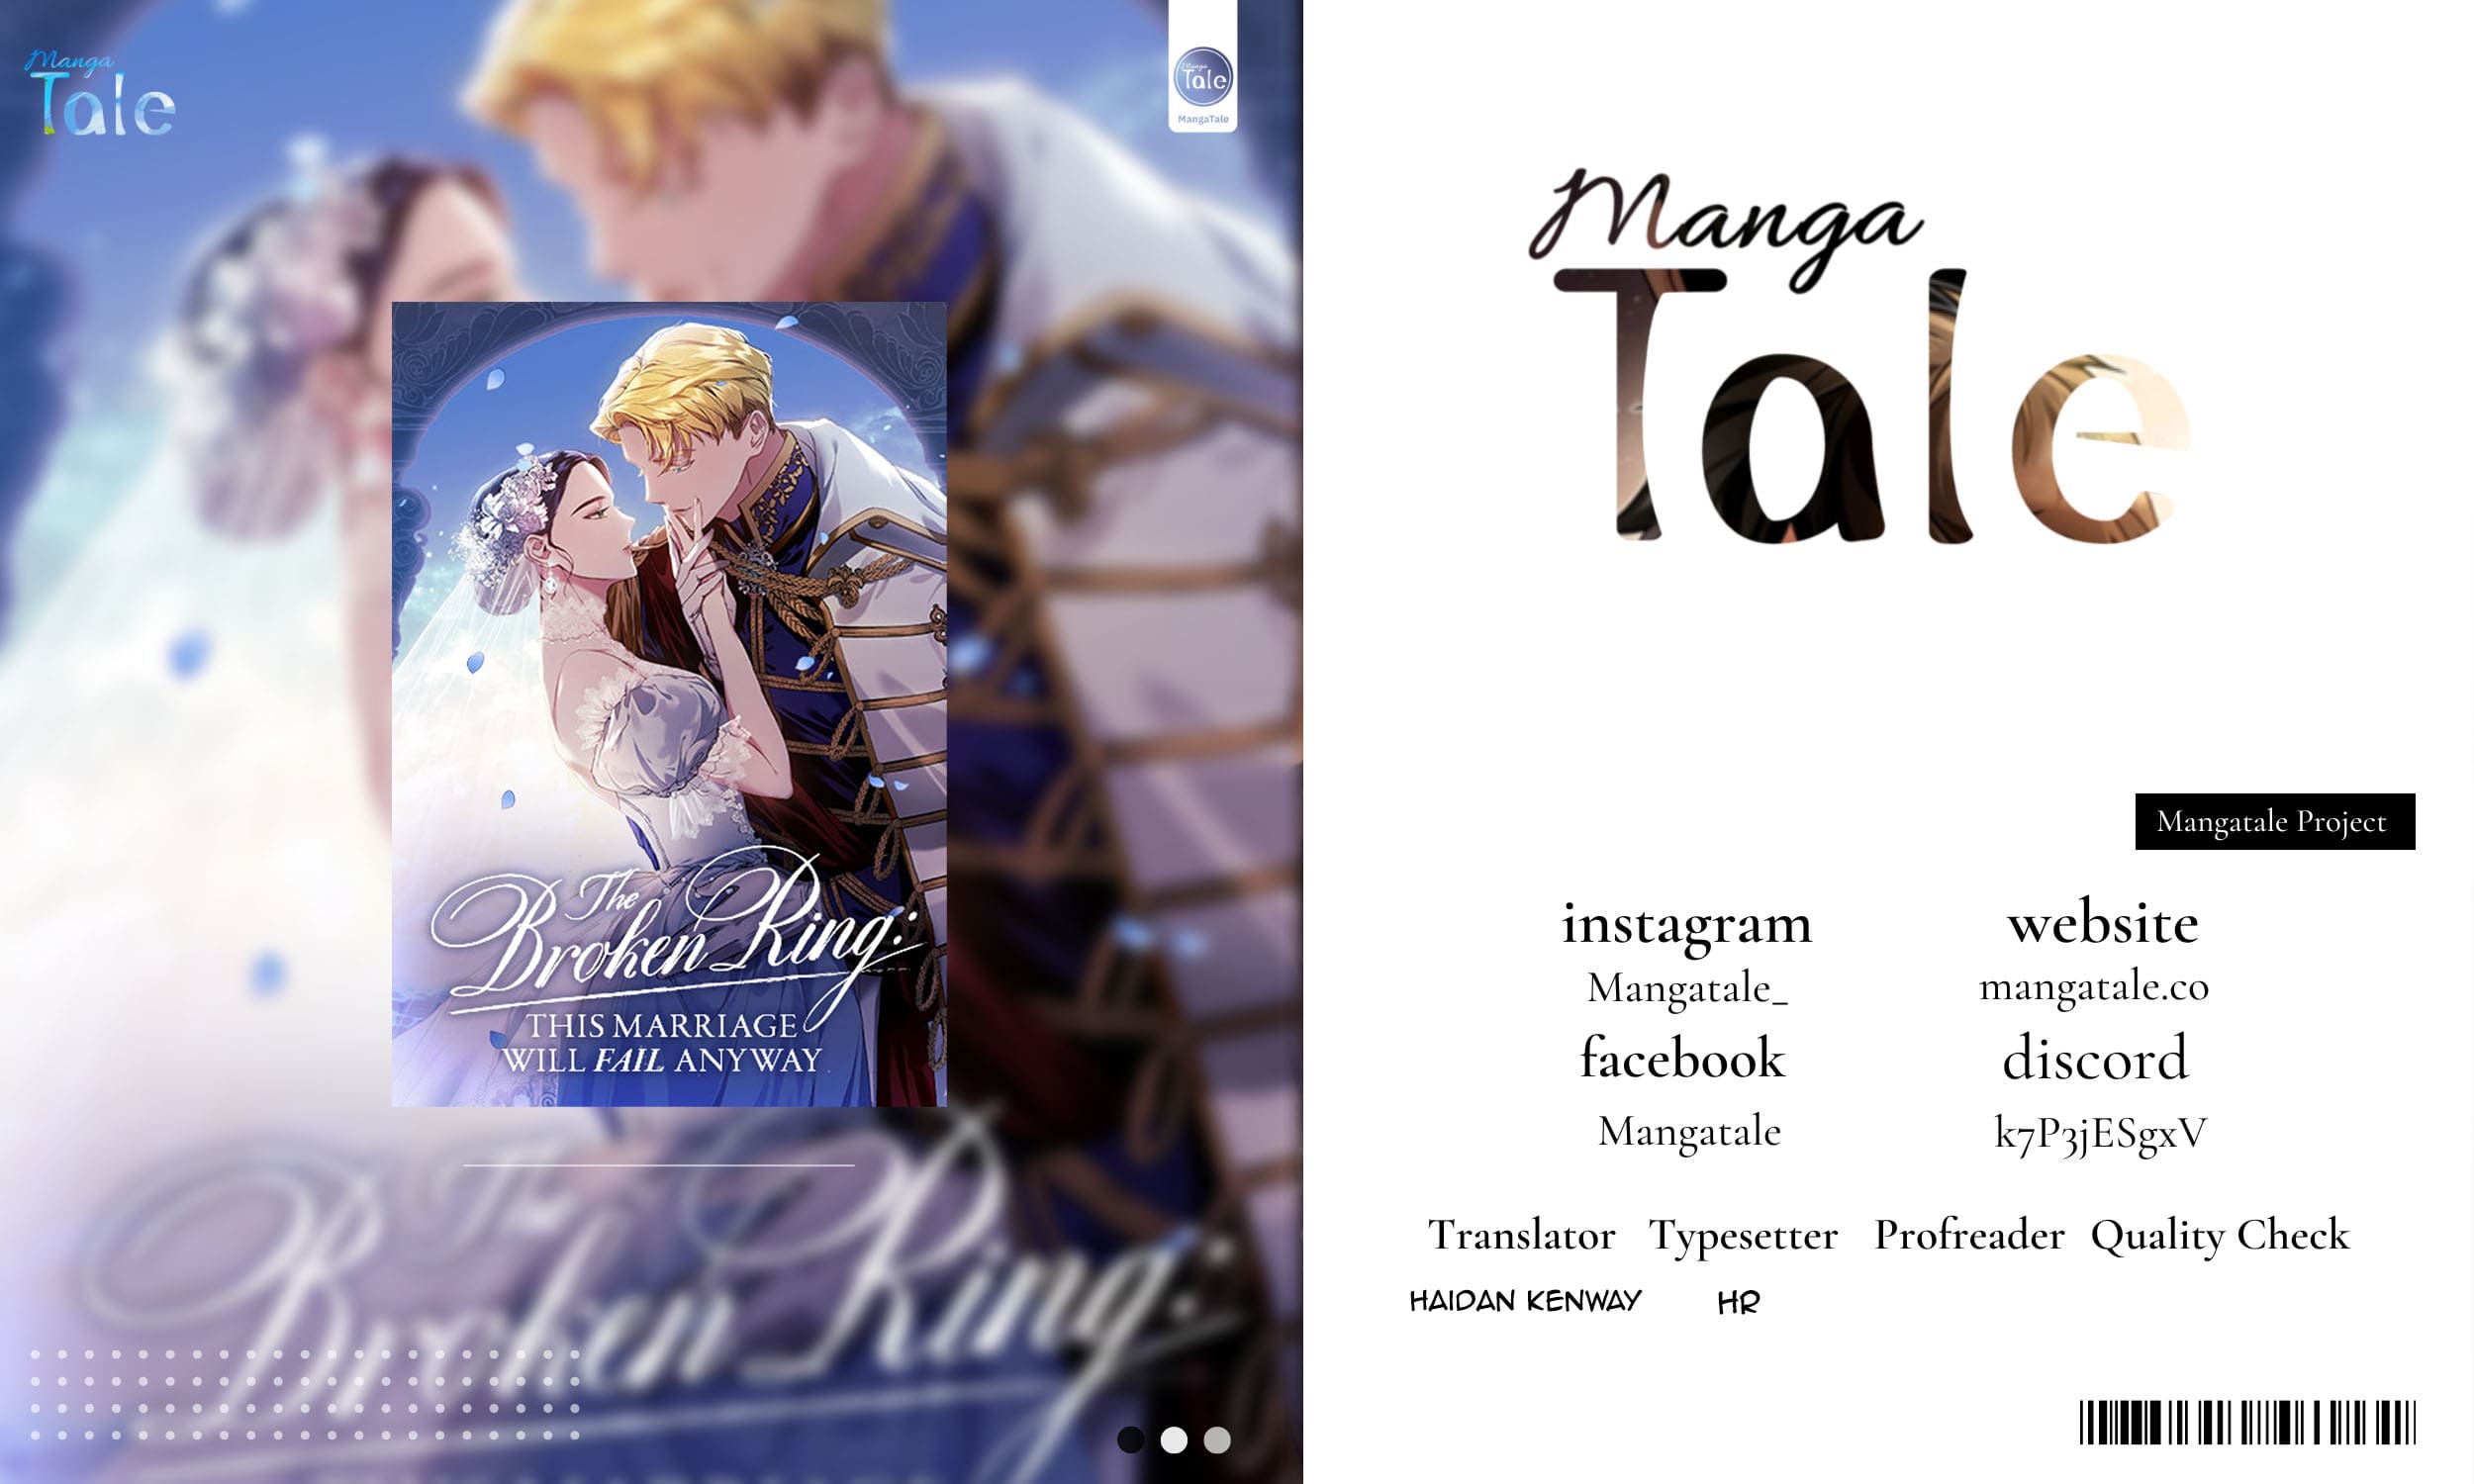 This marriage will fail. The broken Ring this marriage will fail anyway Manga. Манга the broken Ring this marriage will fail anyway на русском. Manhwa broken Ring. This marriage is bound to fail anyway.